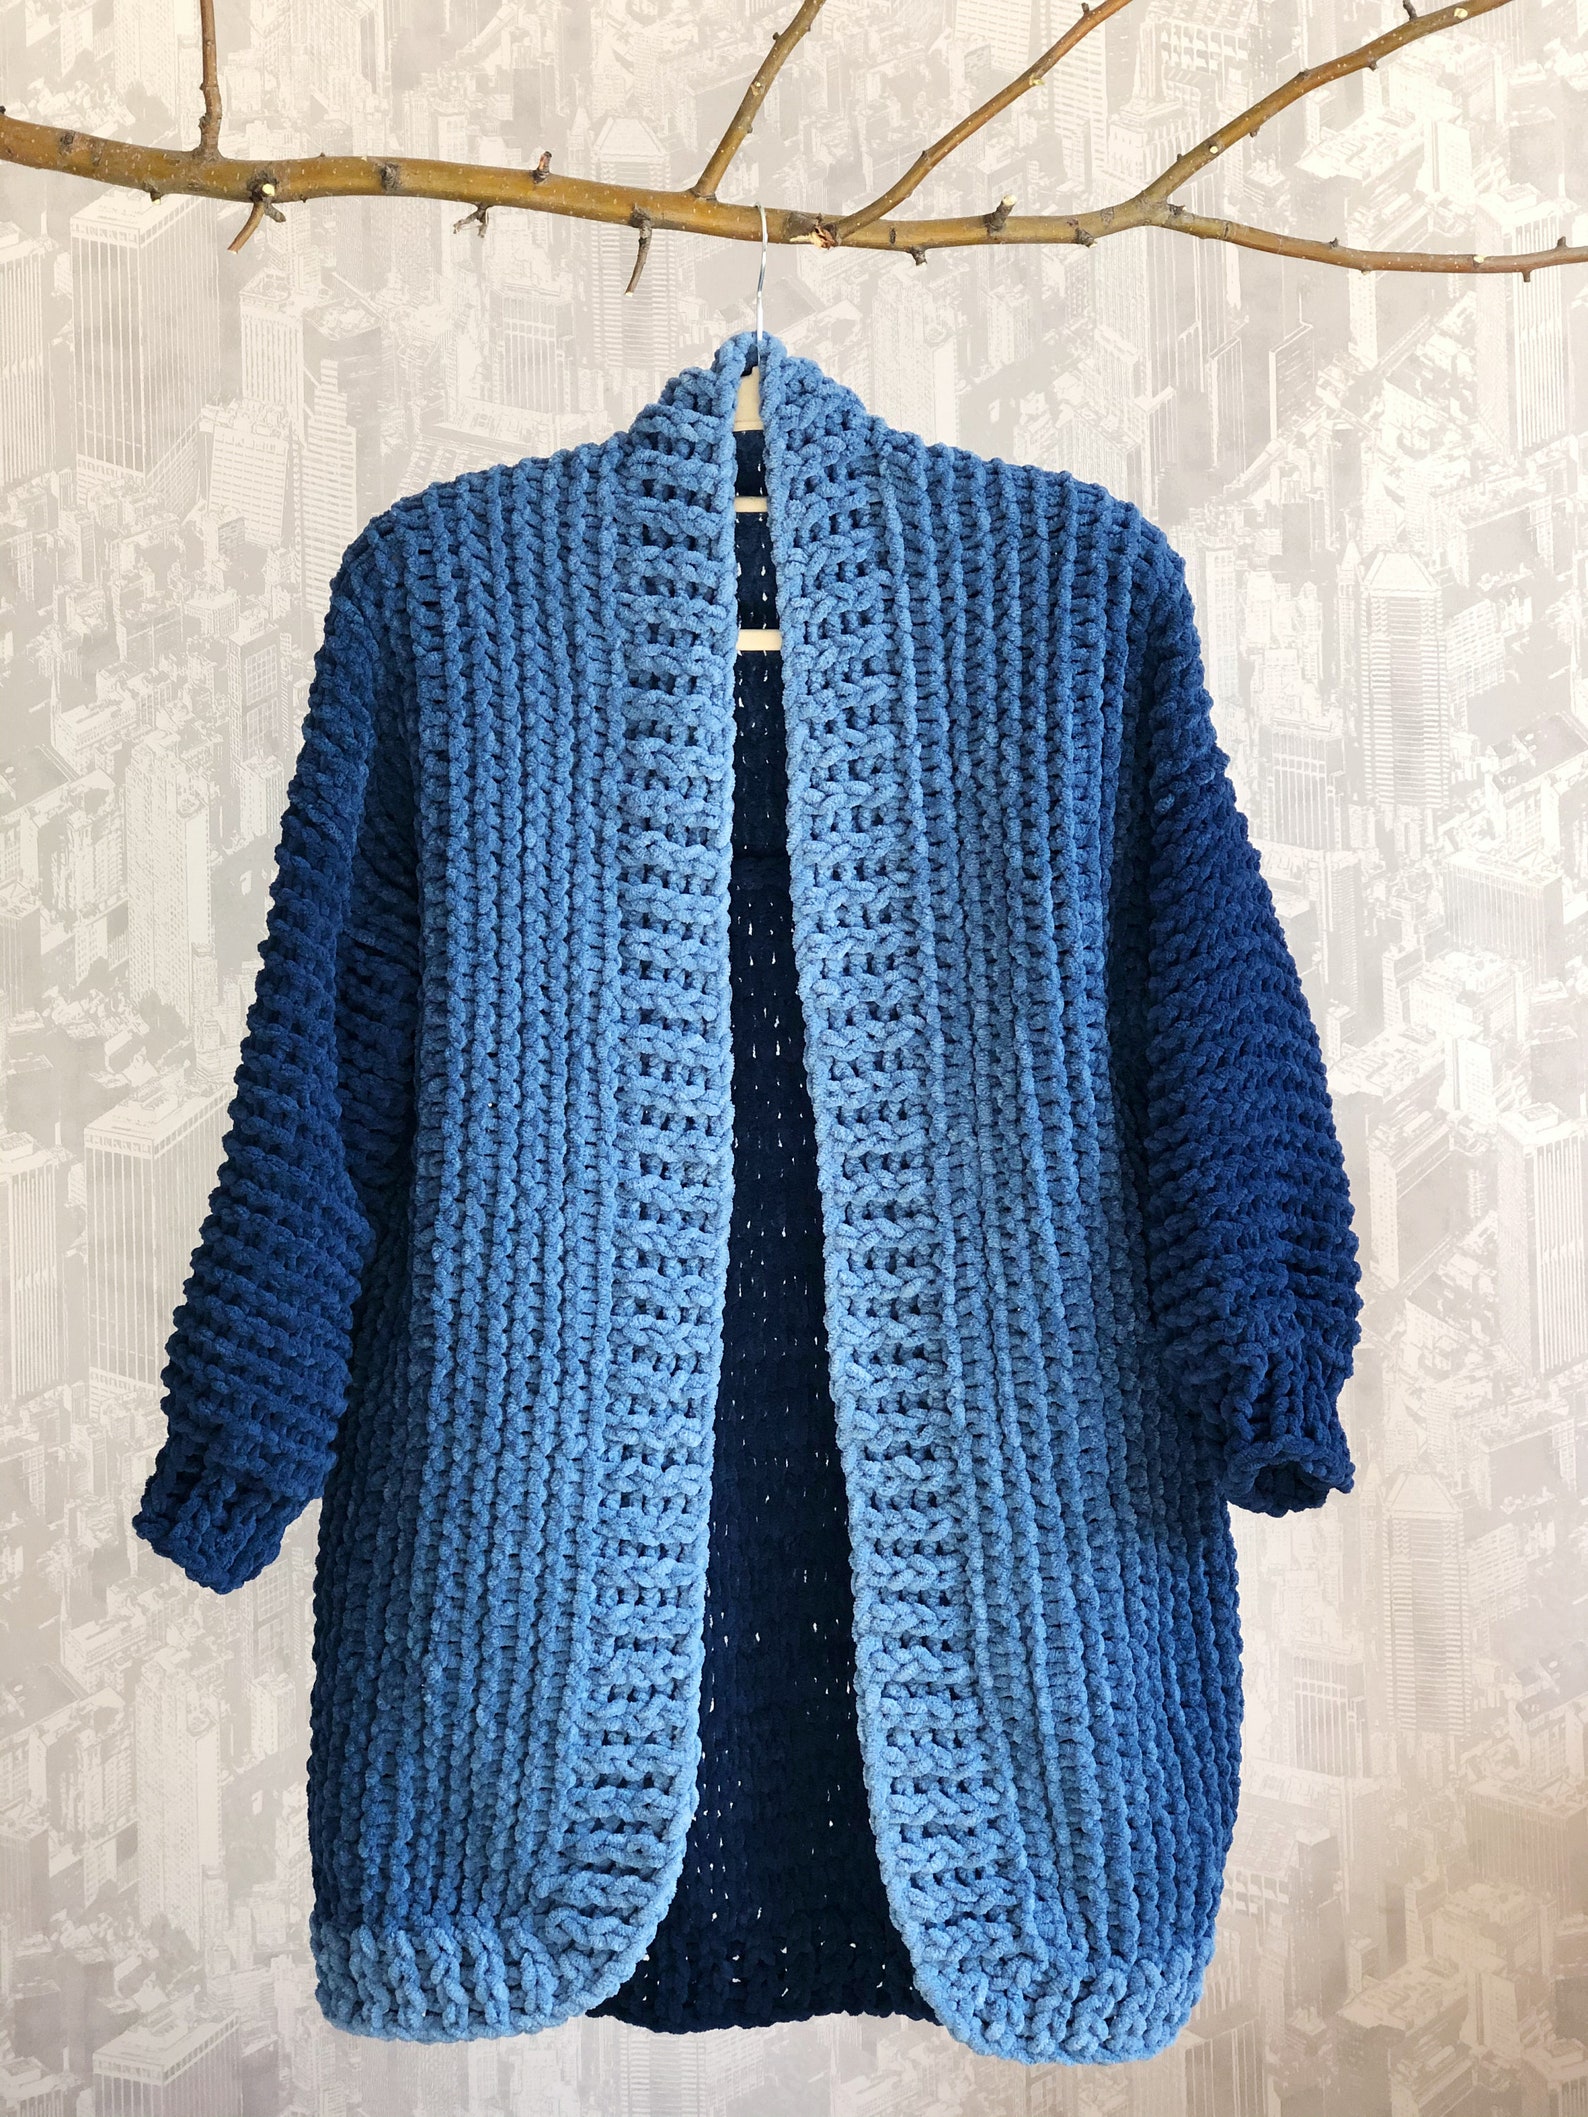 Pattern Cardigan from Alize Puffy fine | Etsy